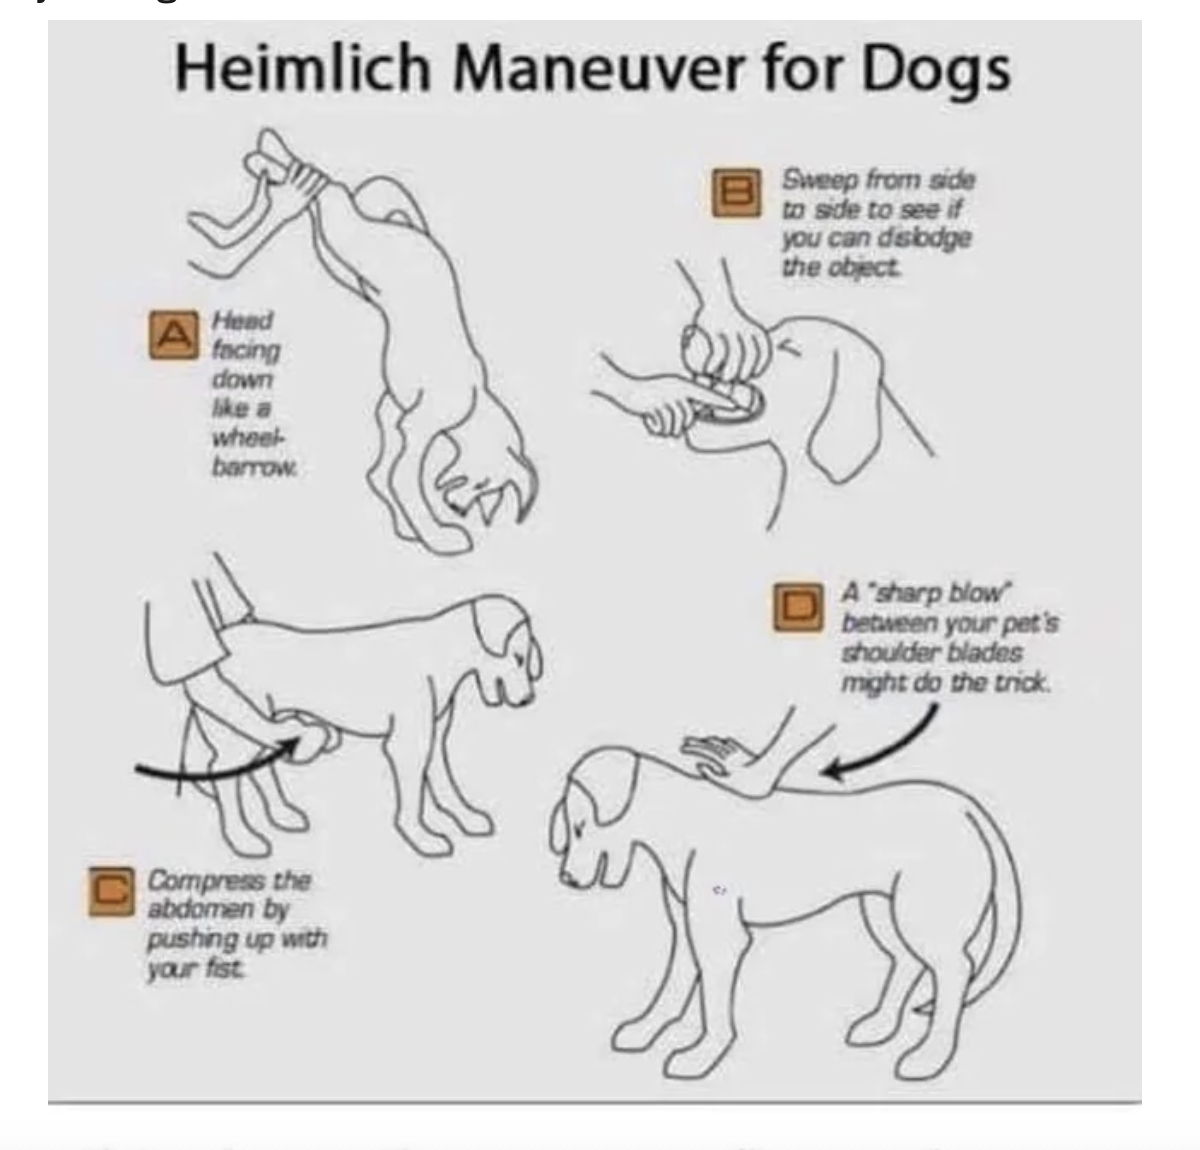 &quot;Heimlich Maneuver for Dogs&quot;